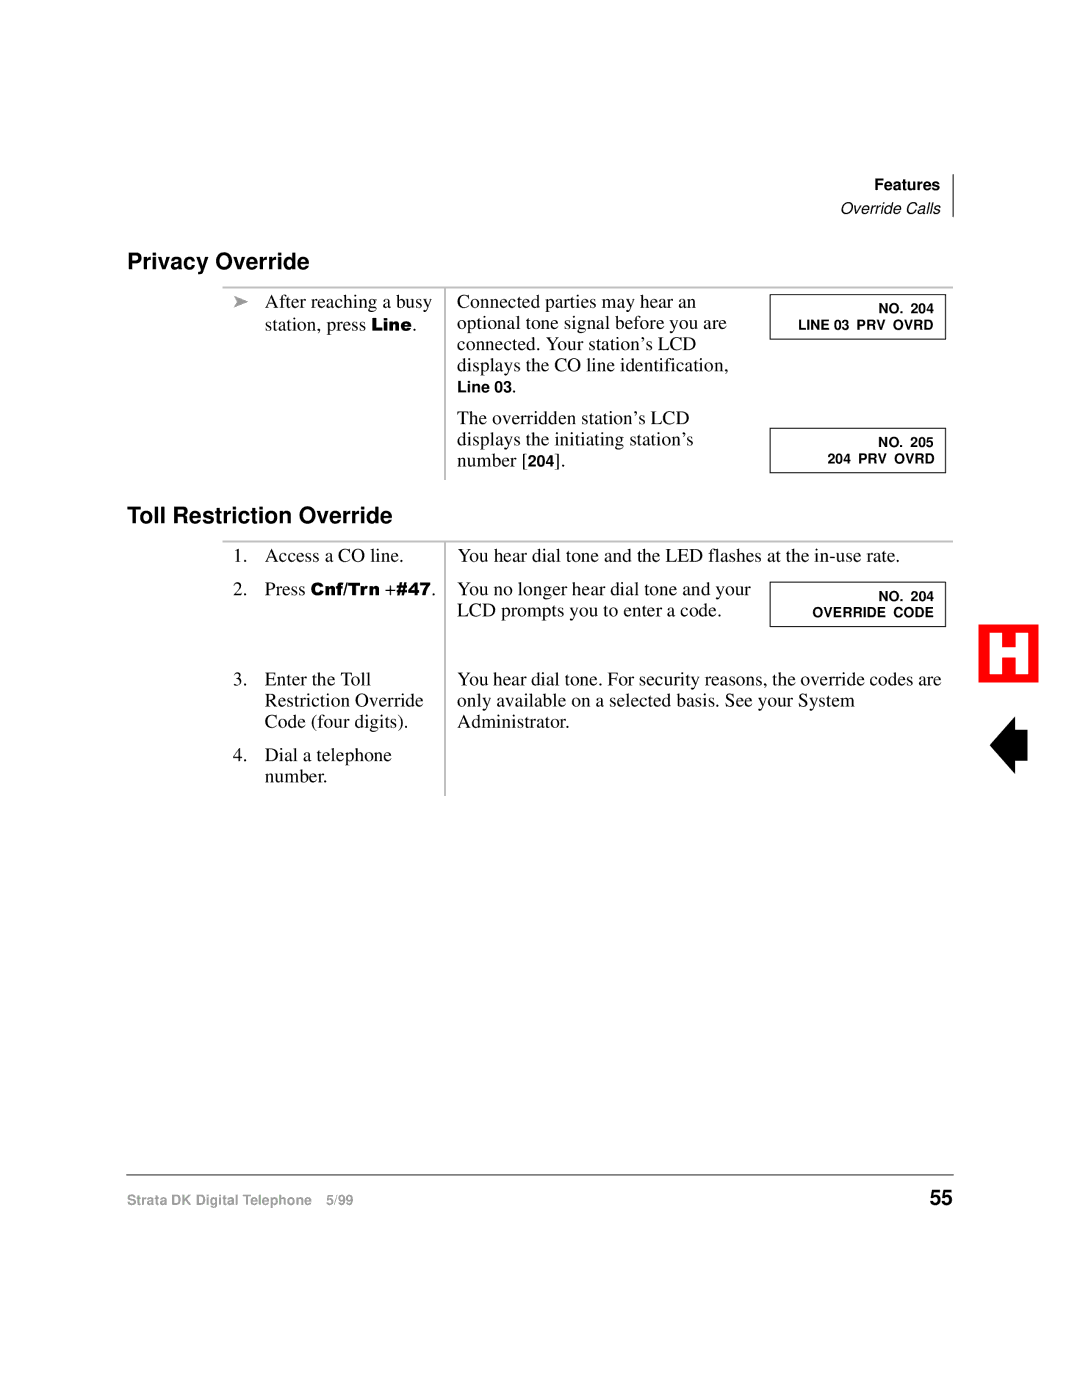 Toshiba Digital Telephone manual Privacy Override, Toll Restriction Override 